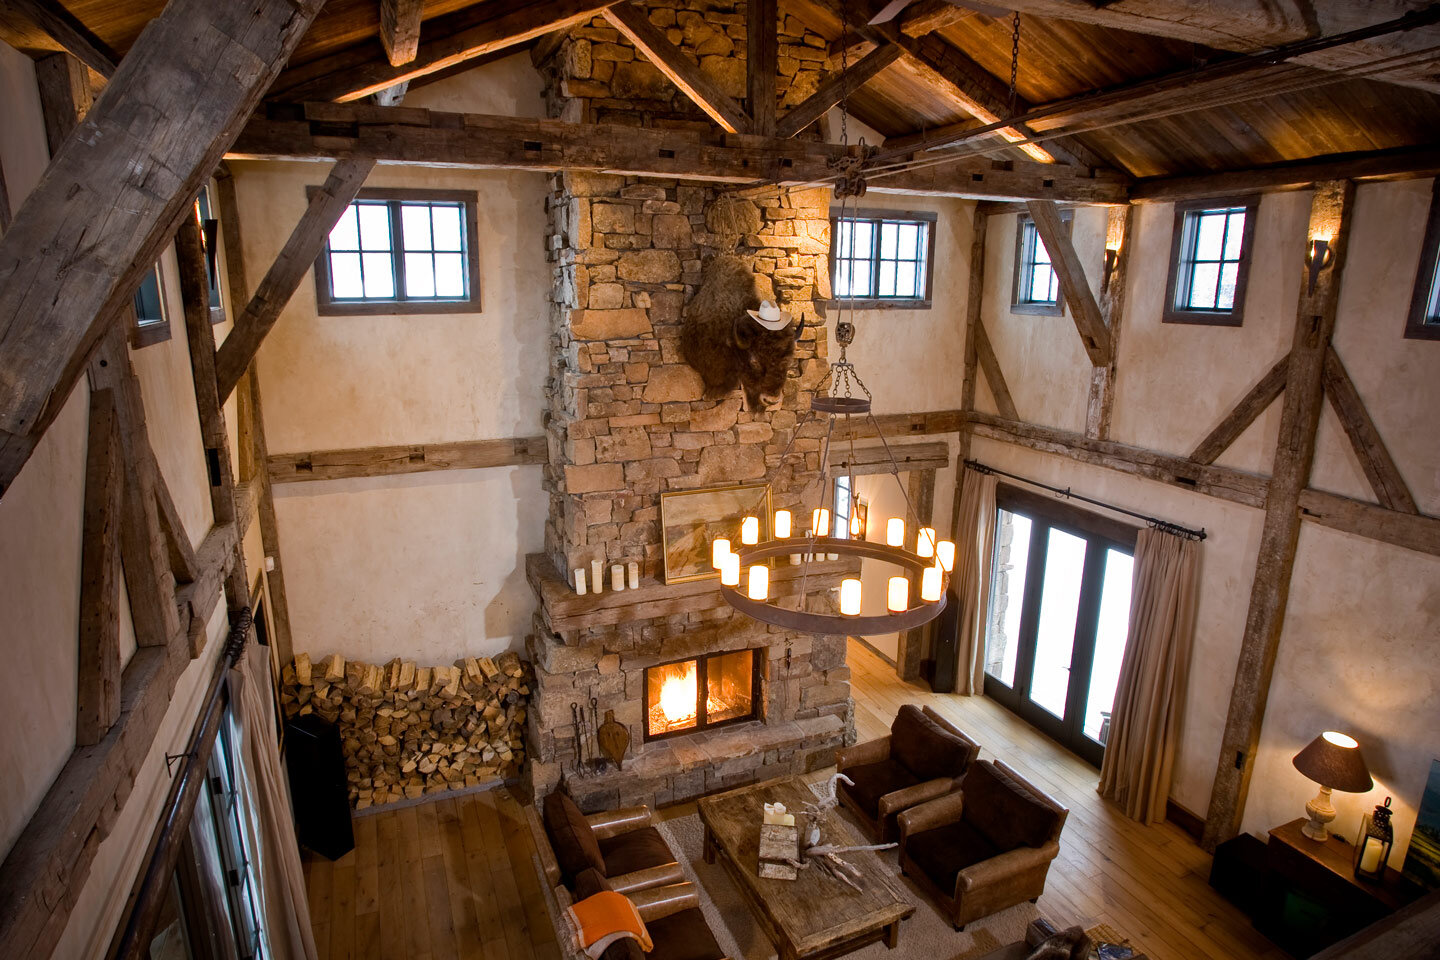 Bird's eye view of living room with large fireplace